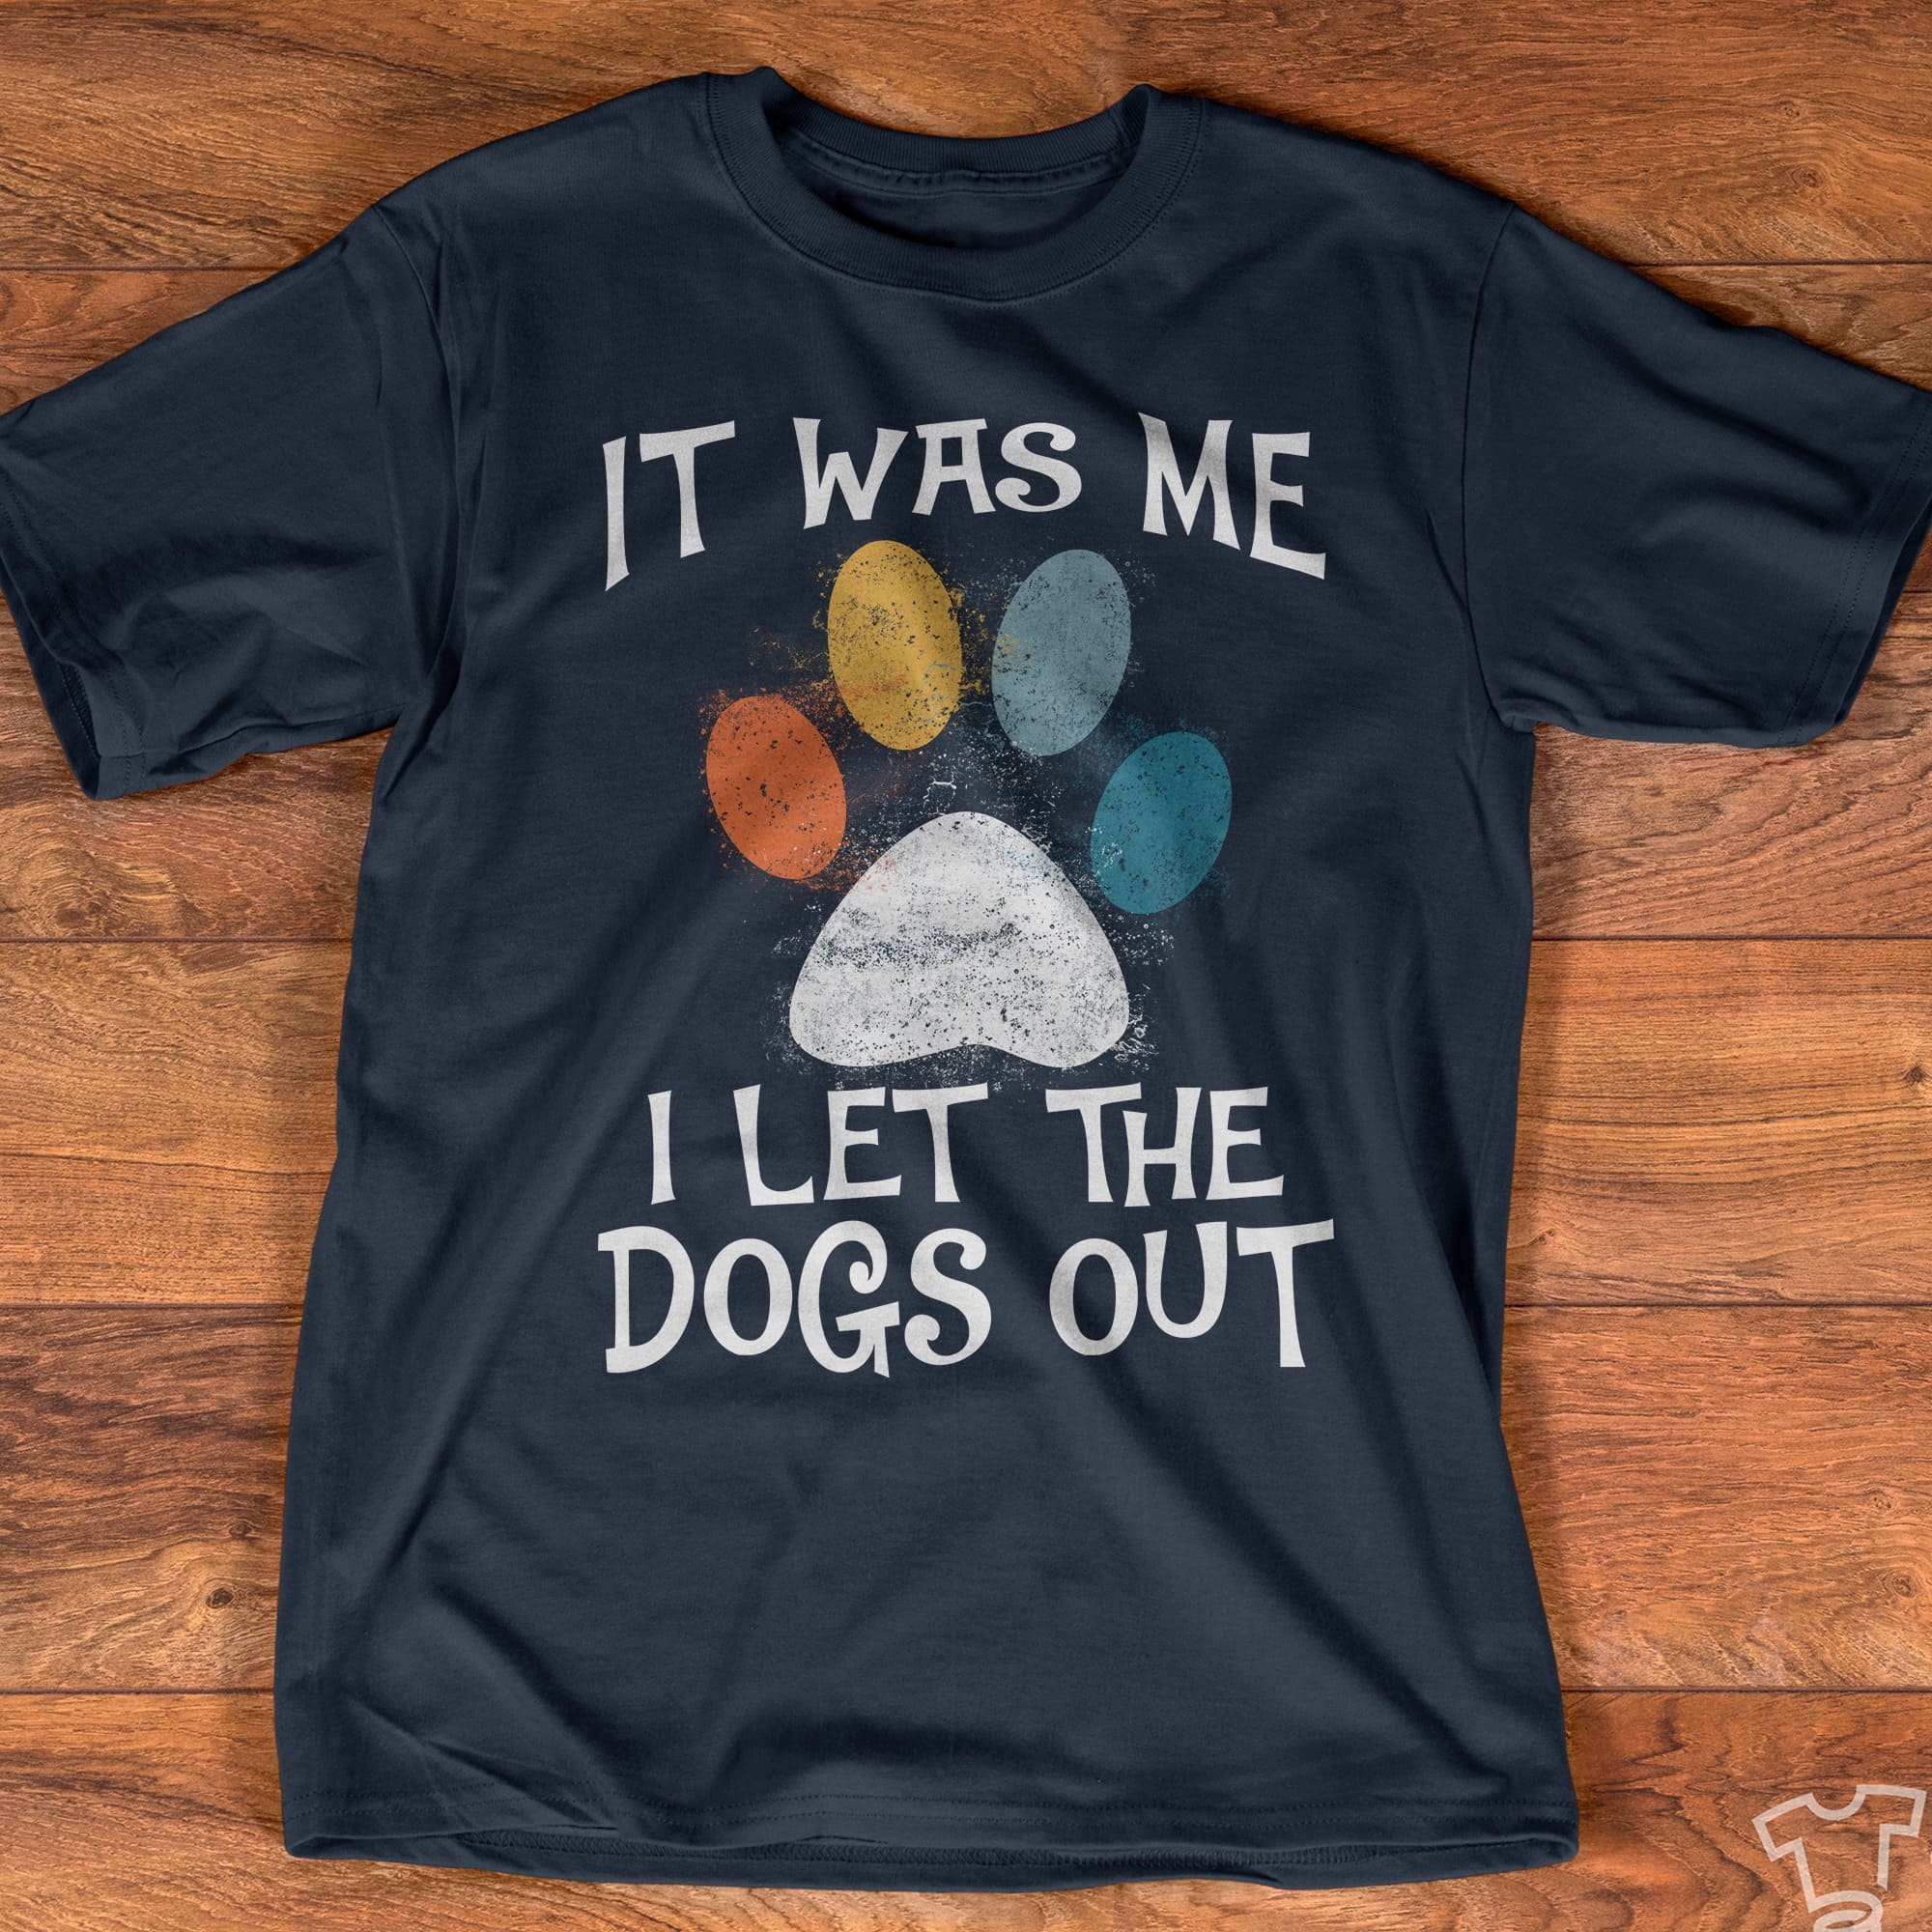 It was me I let the dogs out - Dog footprint graphic T-shirt, dog rescueing